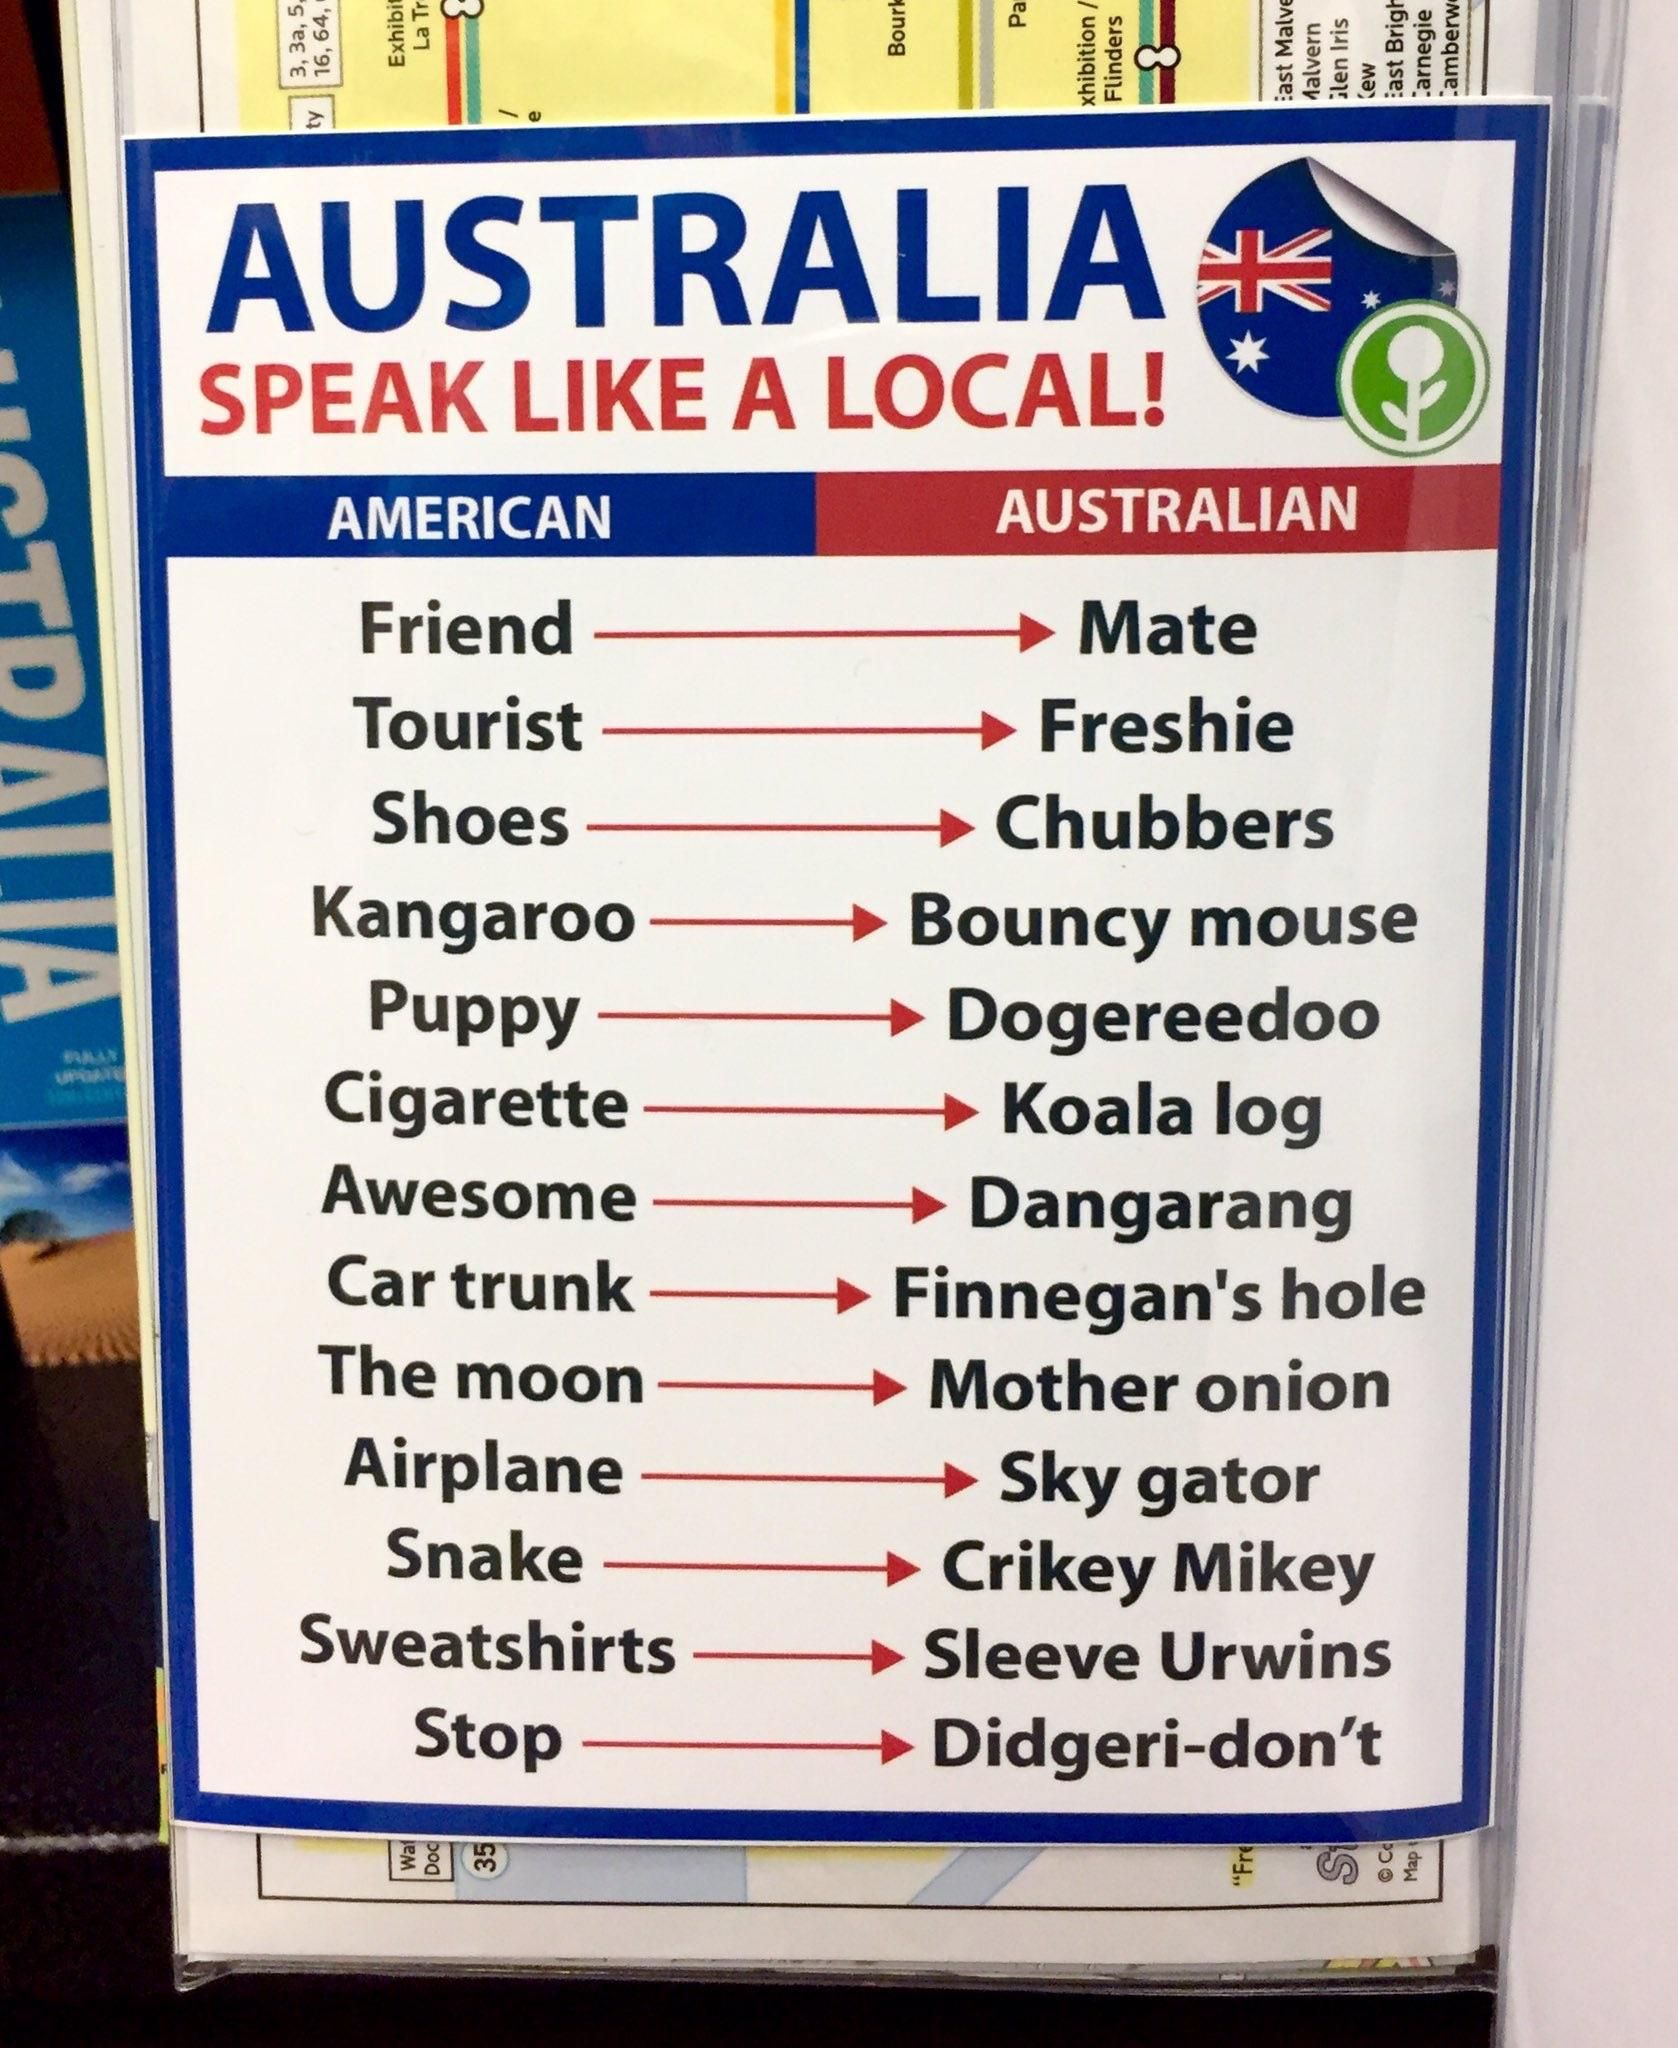 Not sure that's how Australian English works